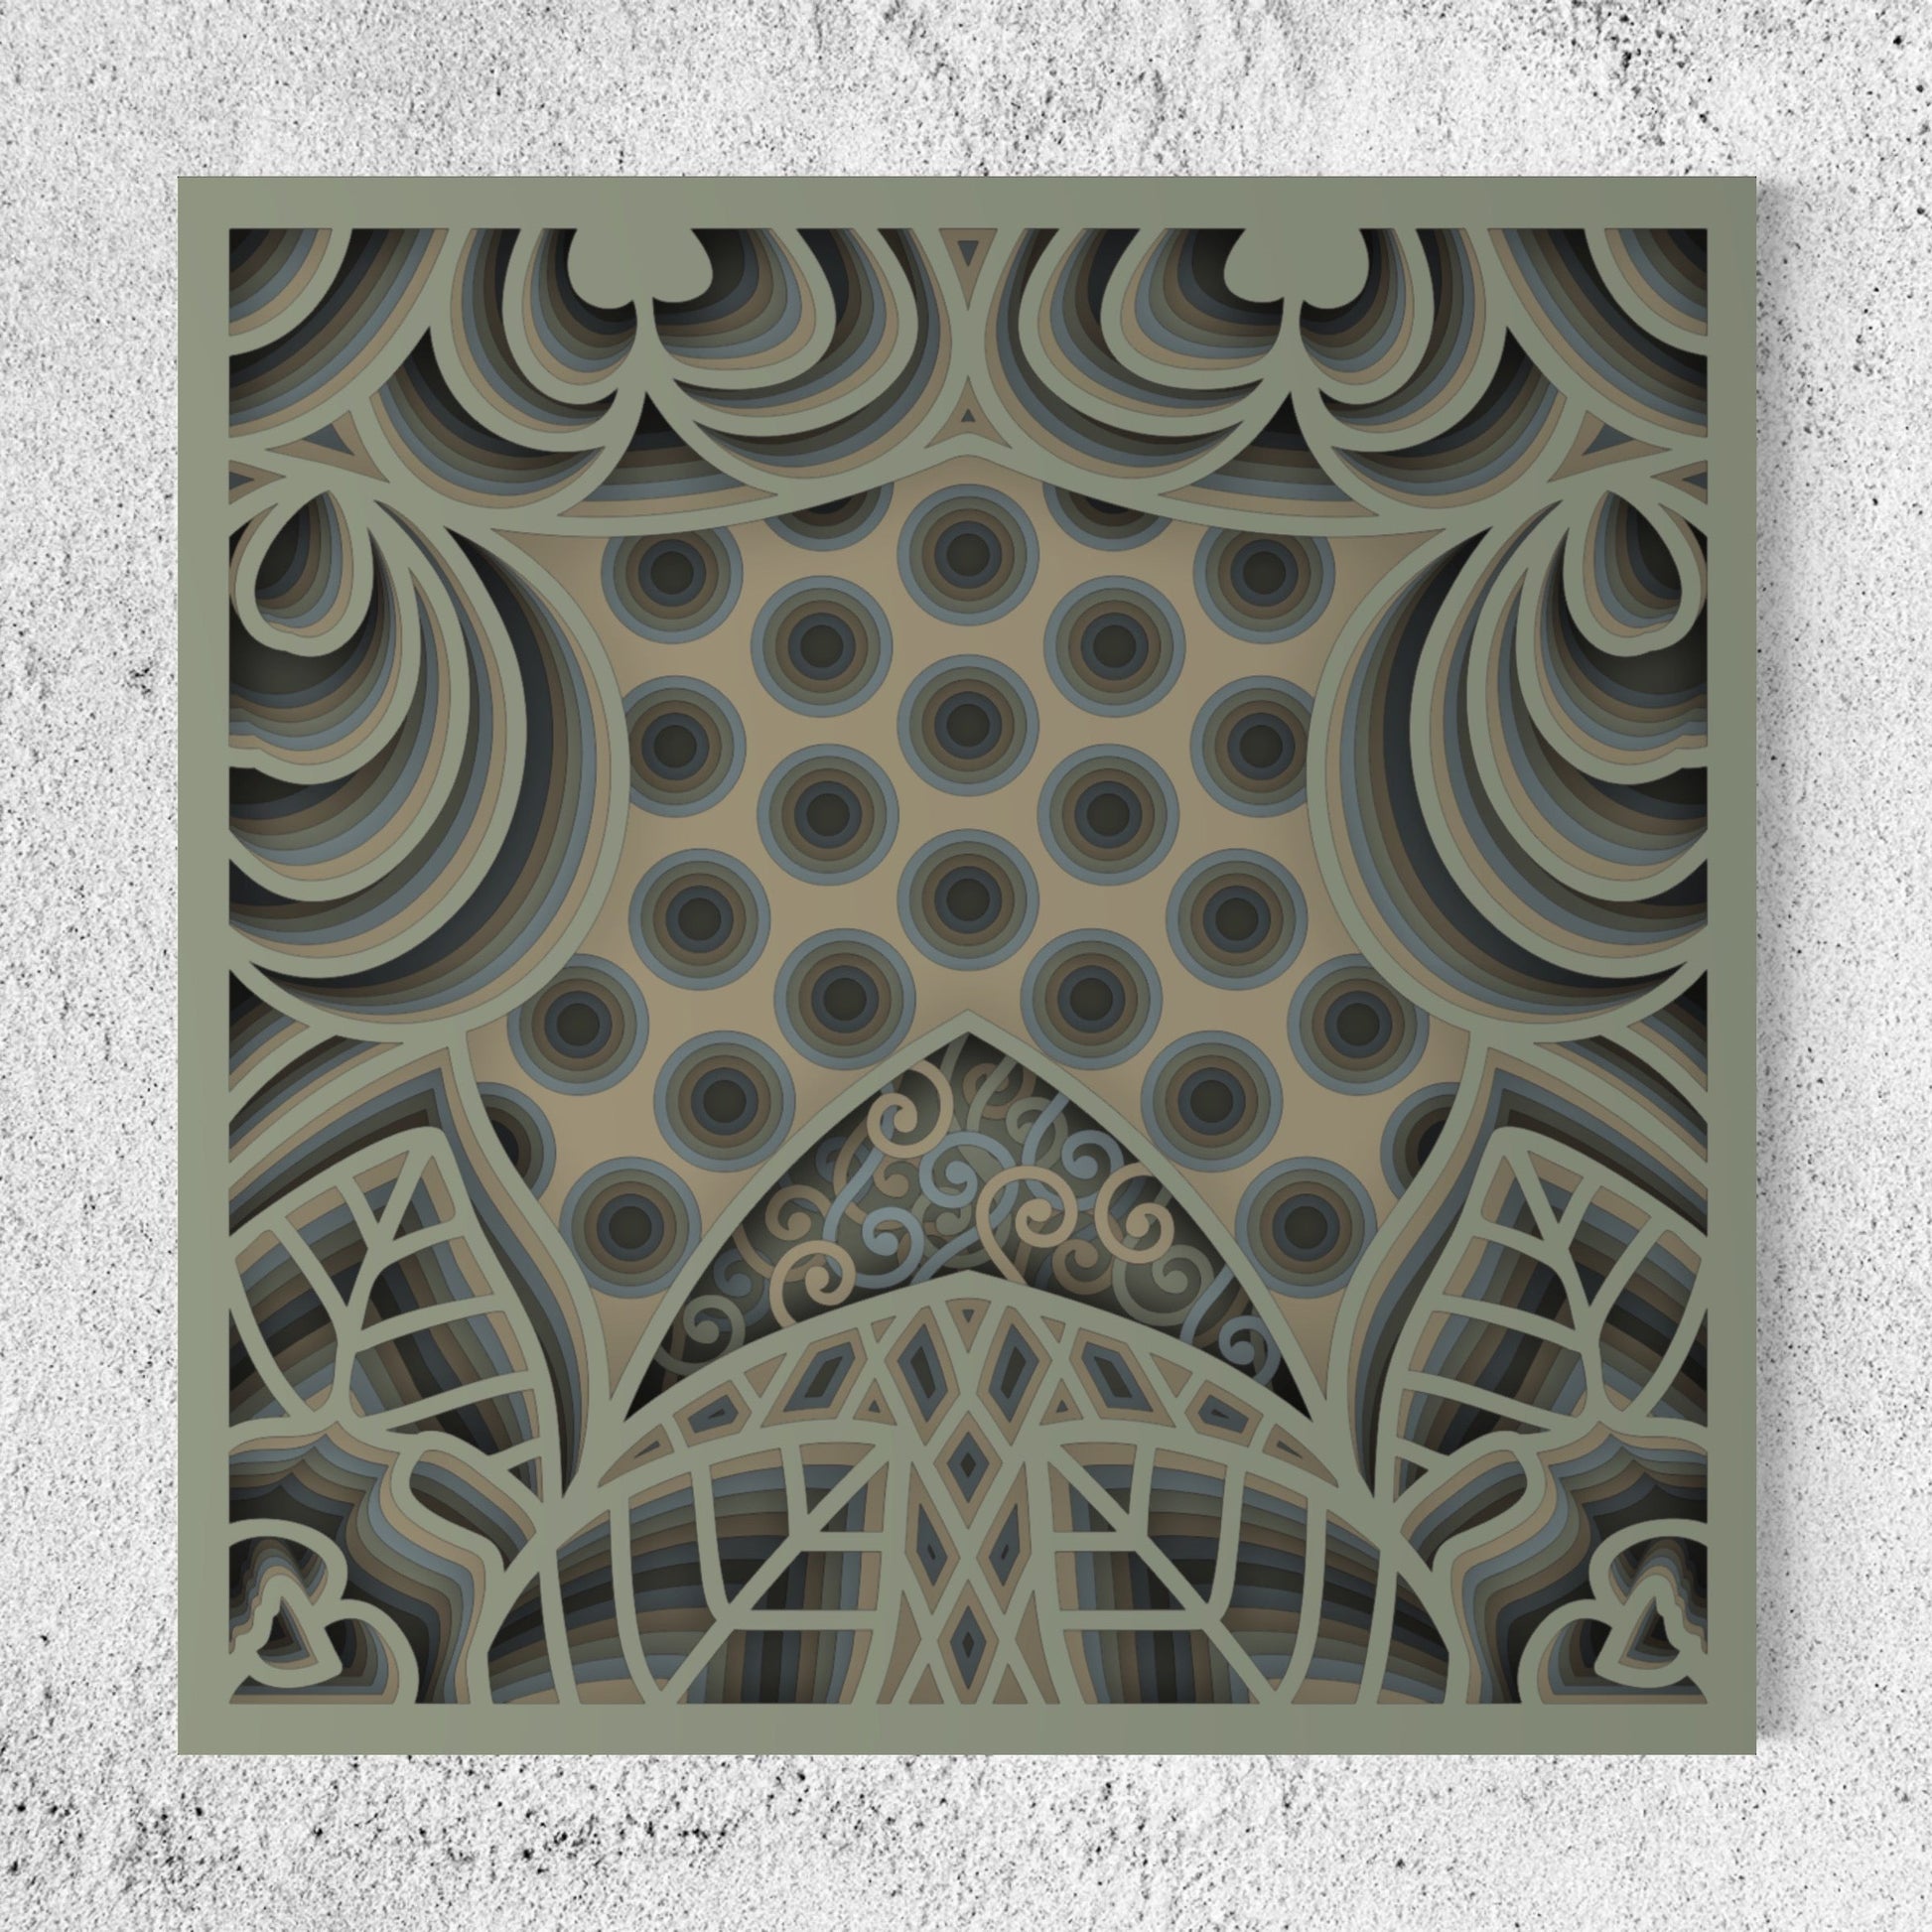 Ace of Spade Wooden Wall Art | 15 x 15 Inch | Color Medium Grey, Pale Oyster And Dark Grey